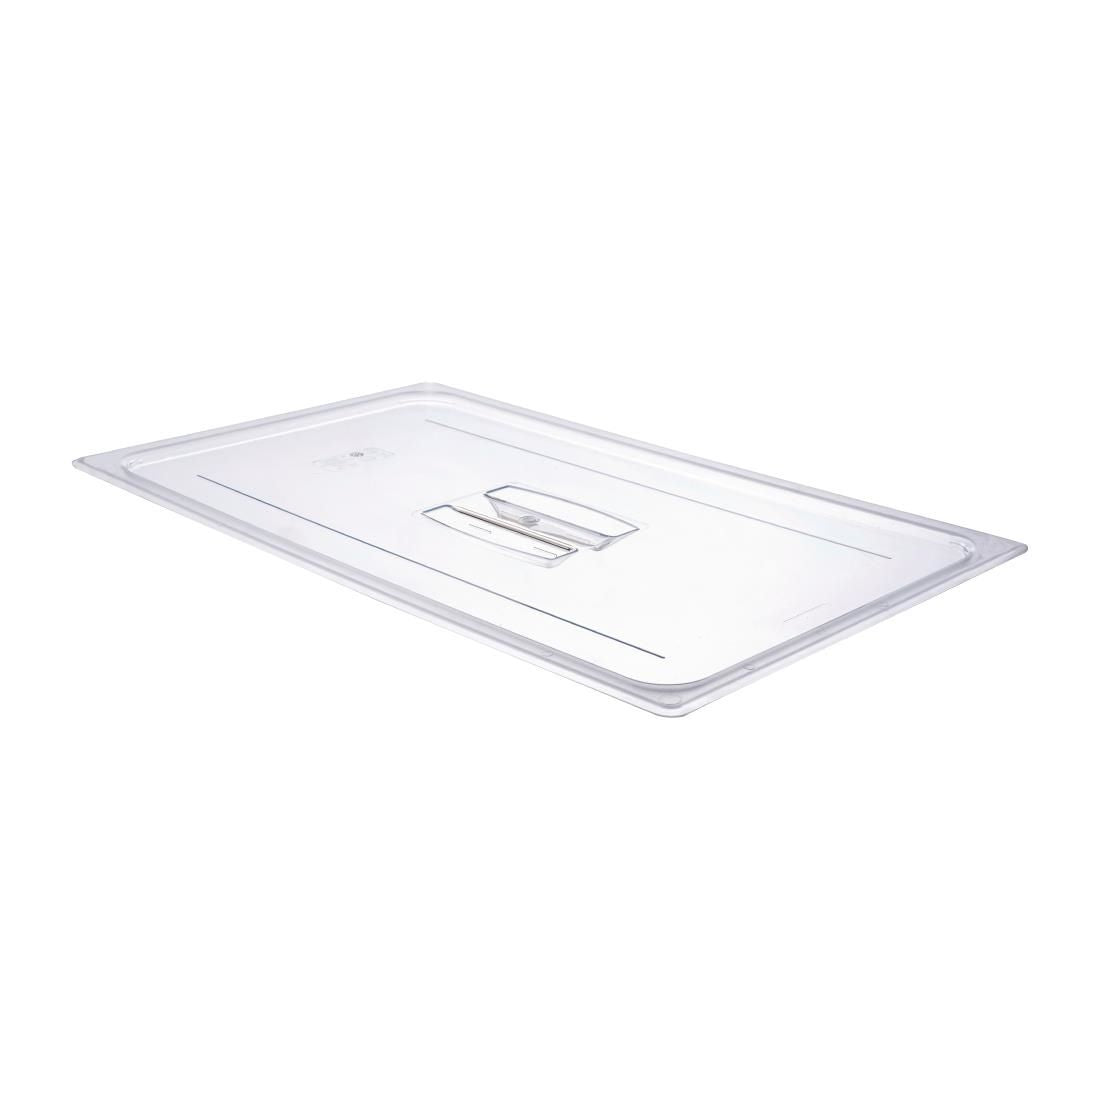 DM742 Cambro Polycarbonate 1/1 Gastronorm Pan Lid JD Catering Equipment Solutions Ltd